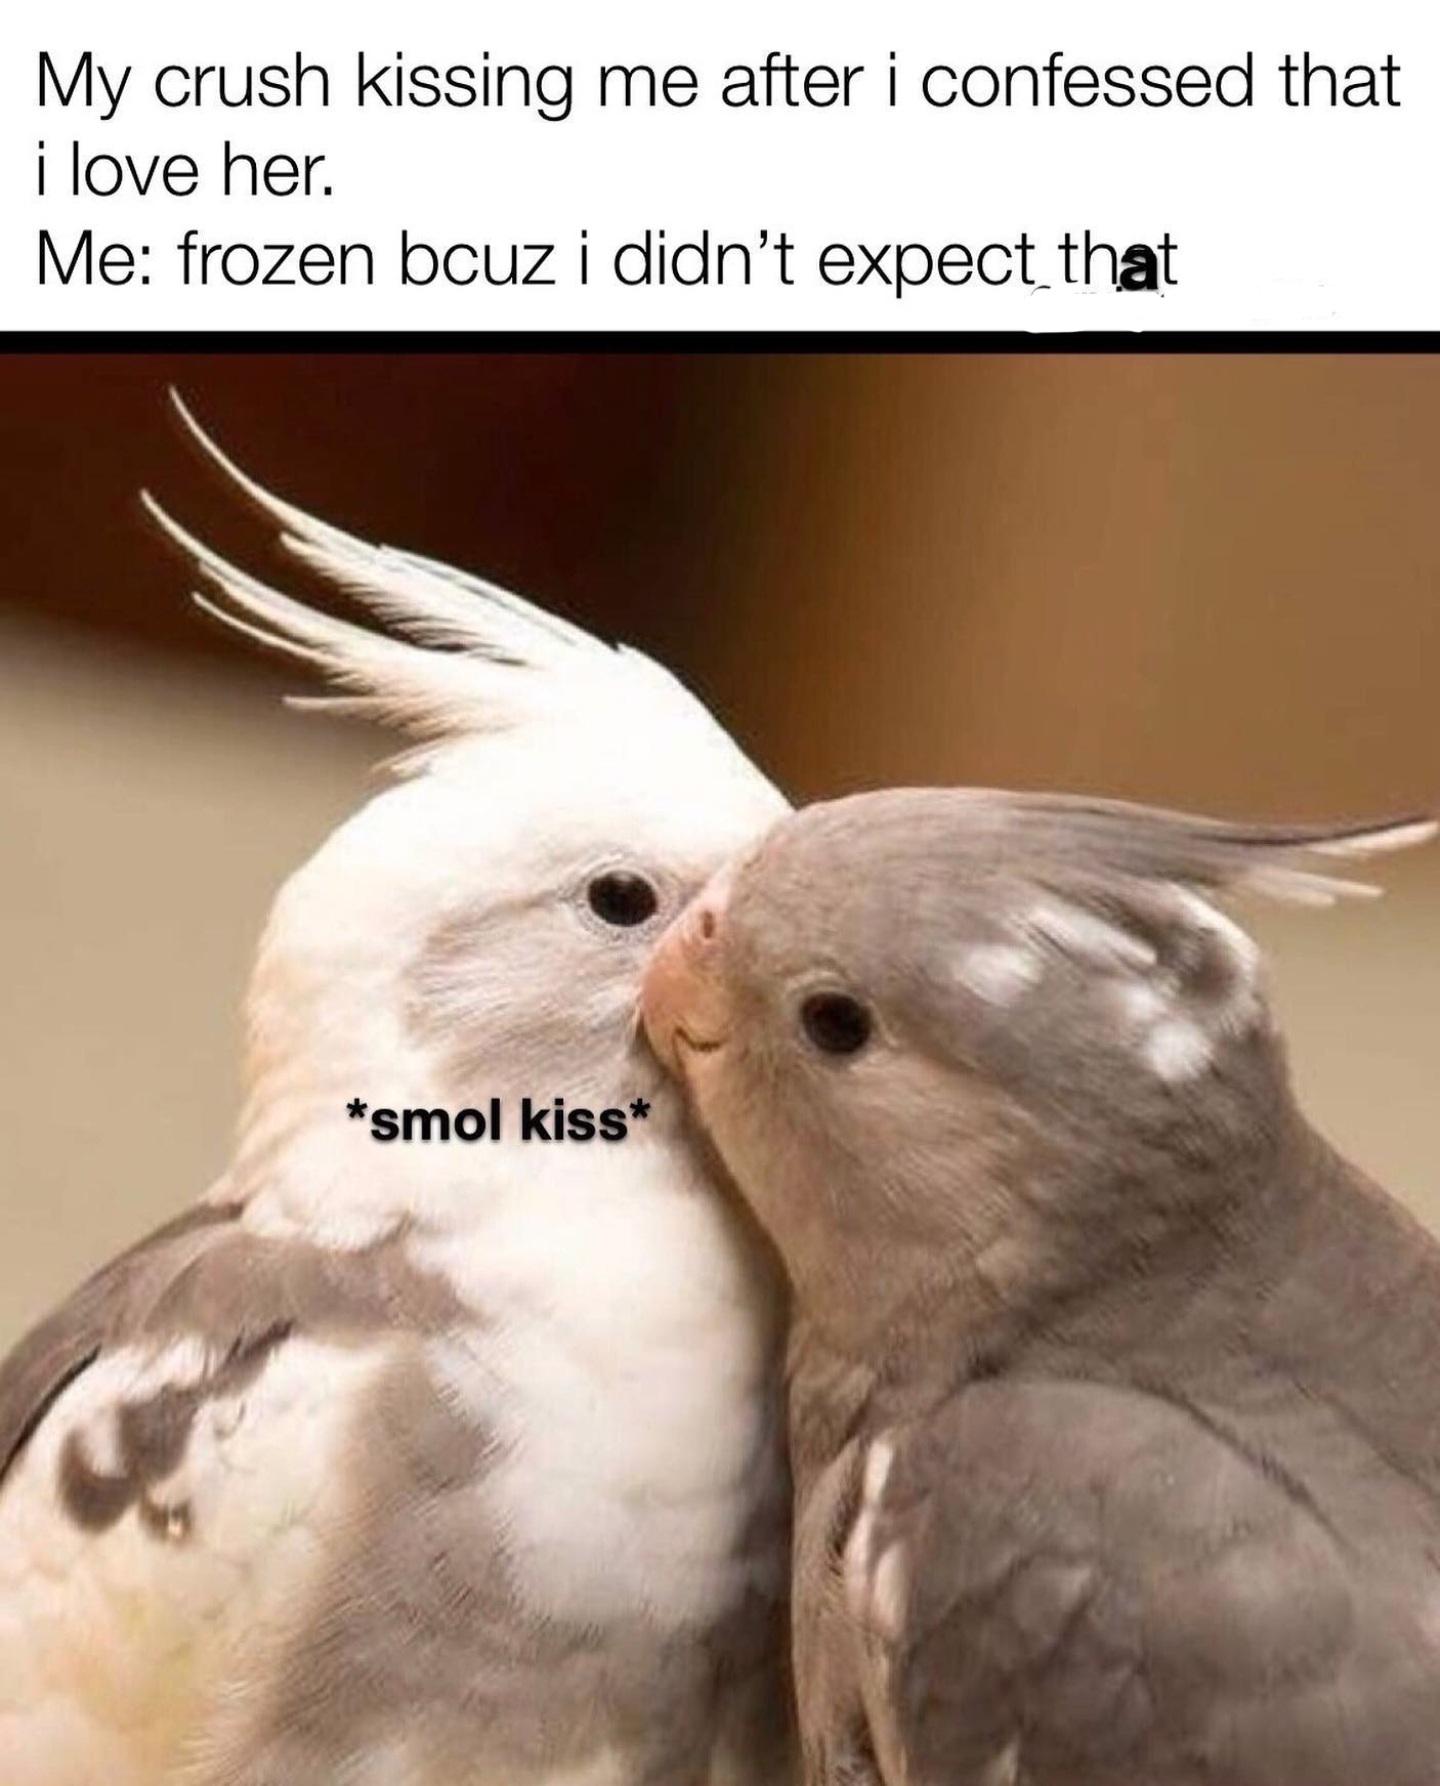 Wholesome memes, Power Wholesome Memes Wholesome memes, Power text: My crush kissing me after i confessed that i love her. Me: frozen bcuz i didn't expect that *smol kiss* 